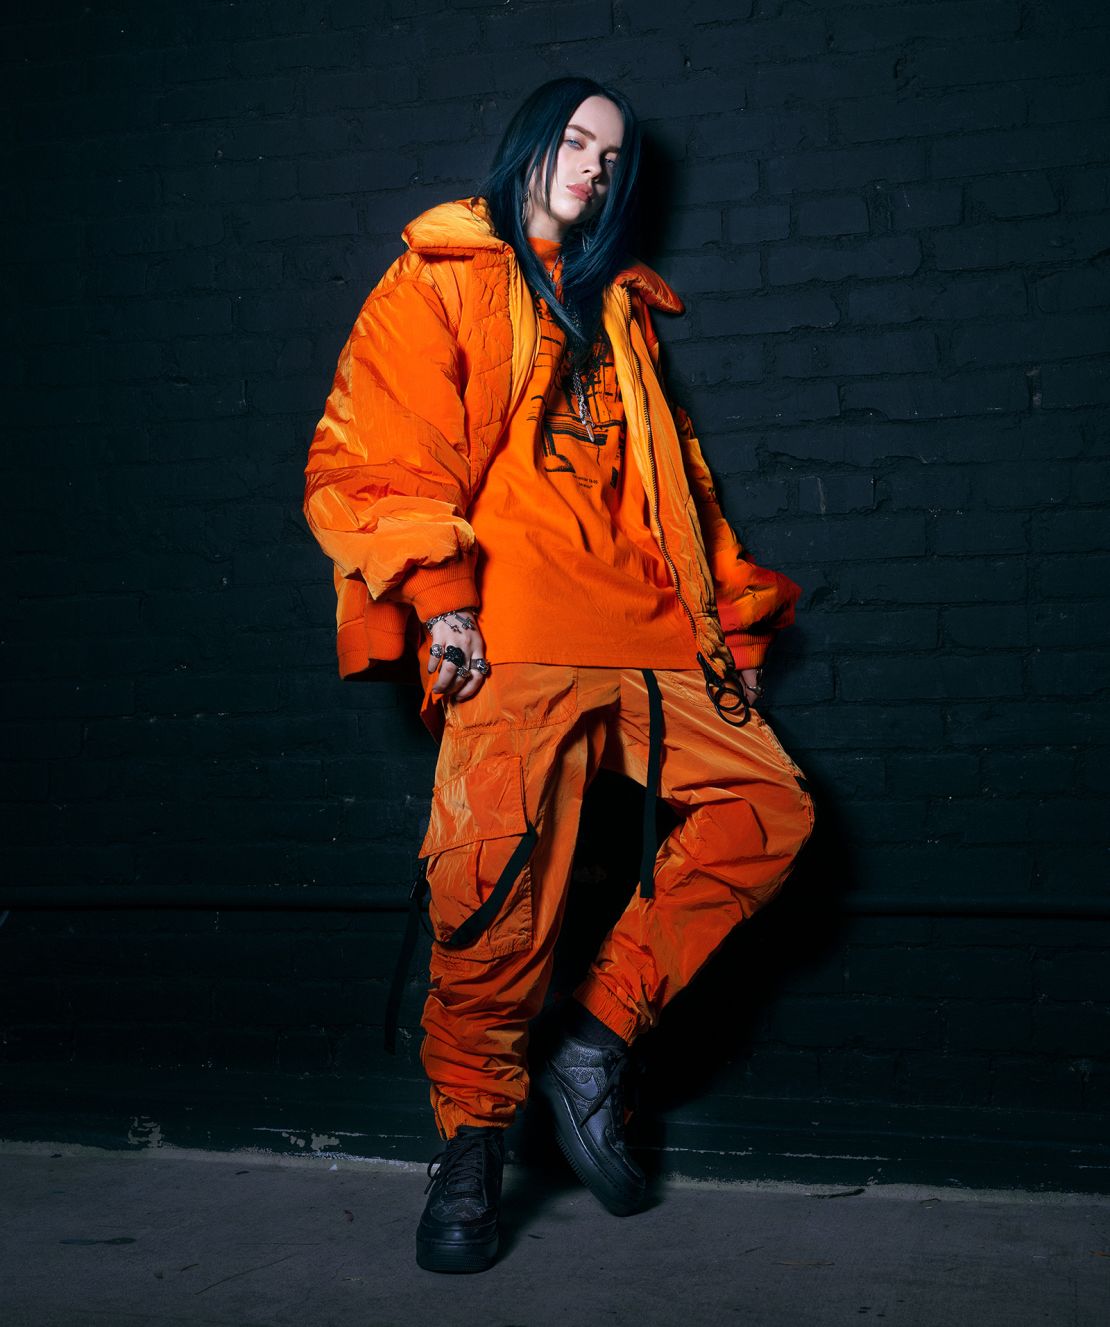 Last month, Klinko shot 17-year old songwriter Billie Eilish for Vogue Hong Kong alongside his artistic collaborator, Koala. Klinko said: "She used daylight and I used flash and a complicated setup, and she shot it in a very spontaneous way. And we just mixed them together."